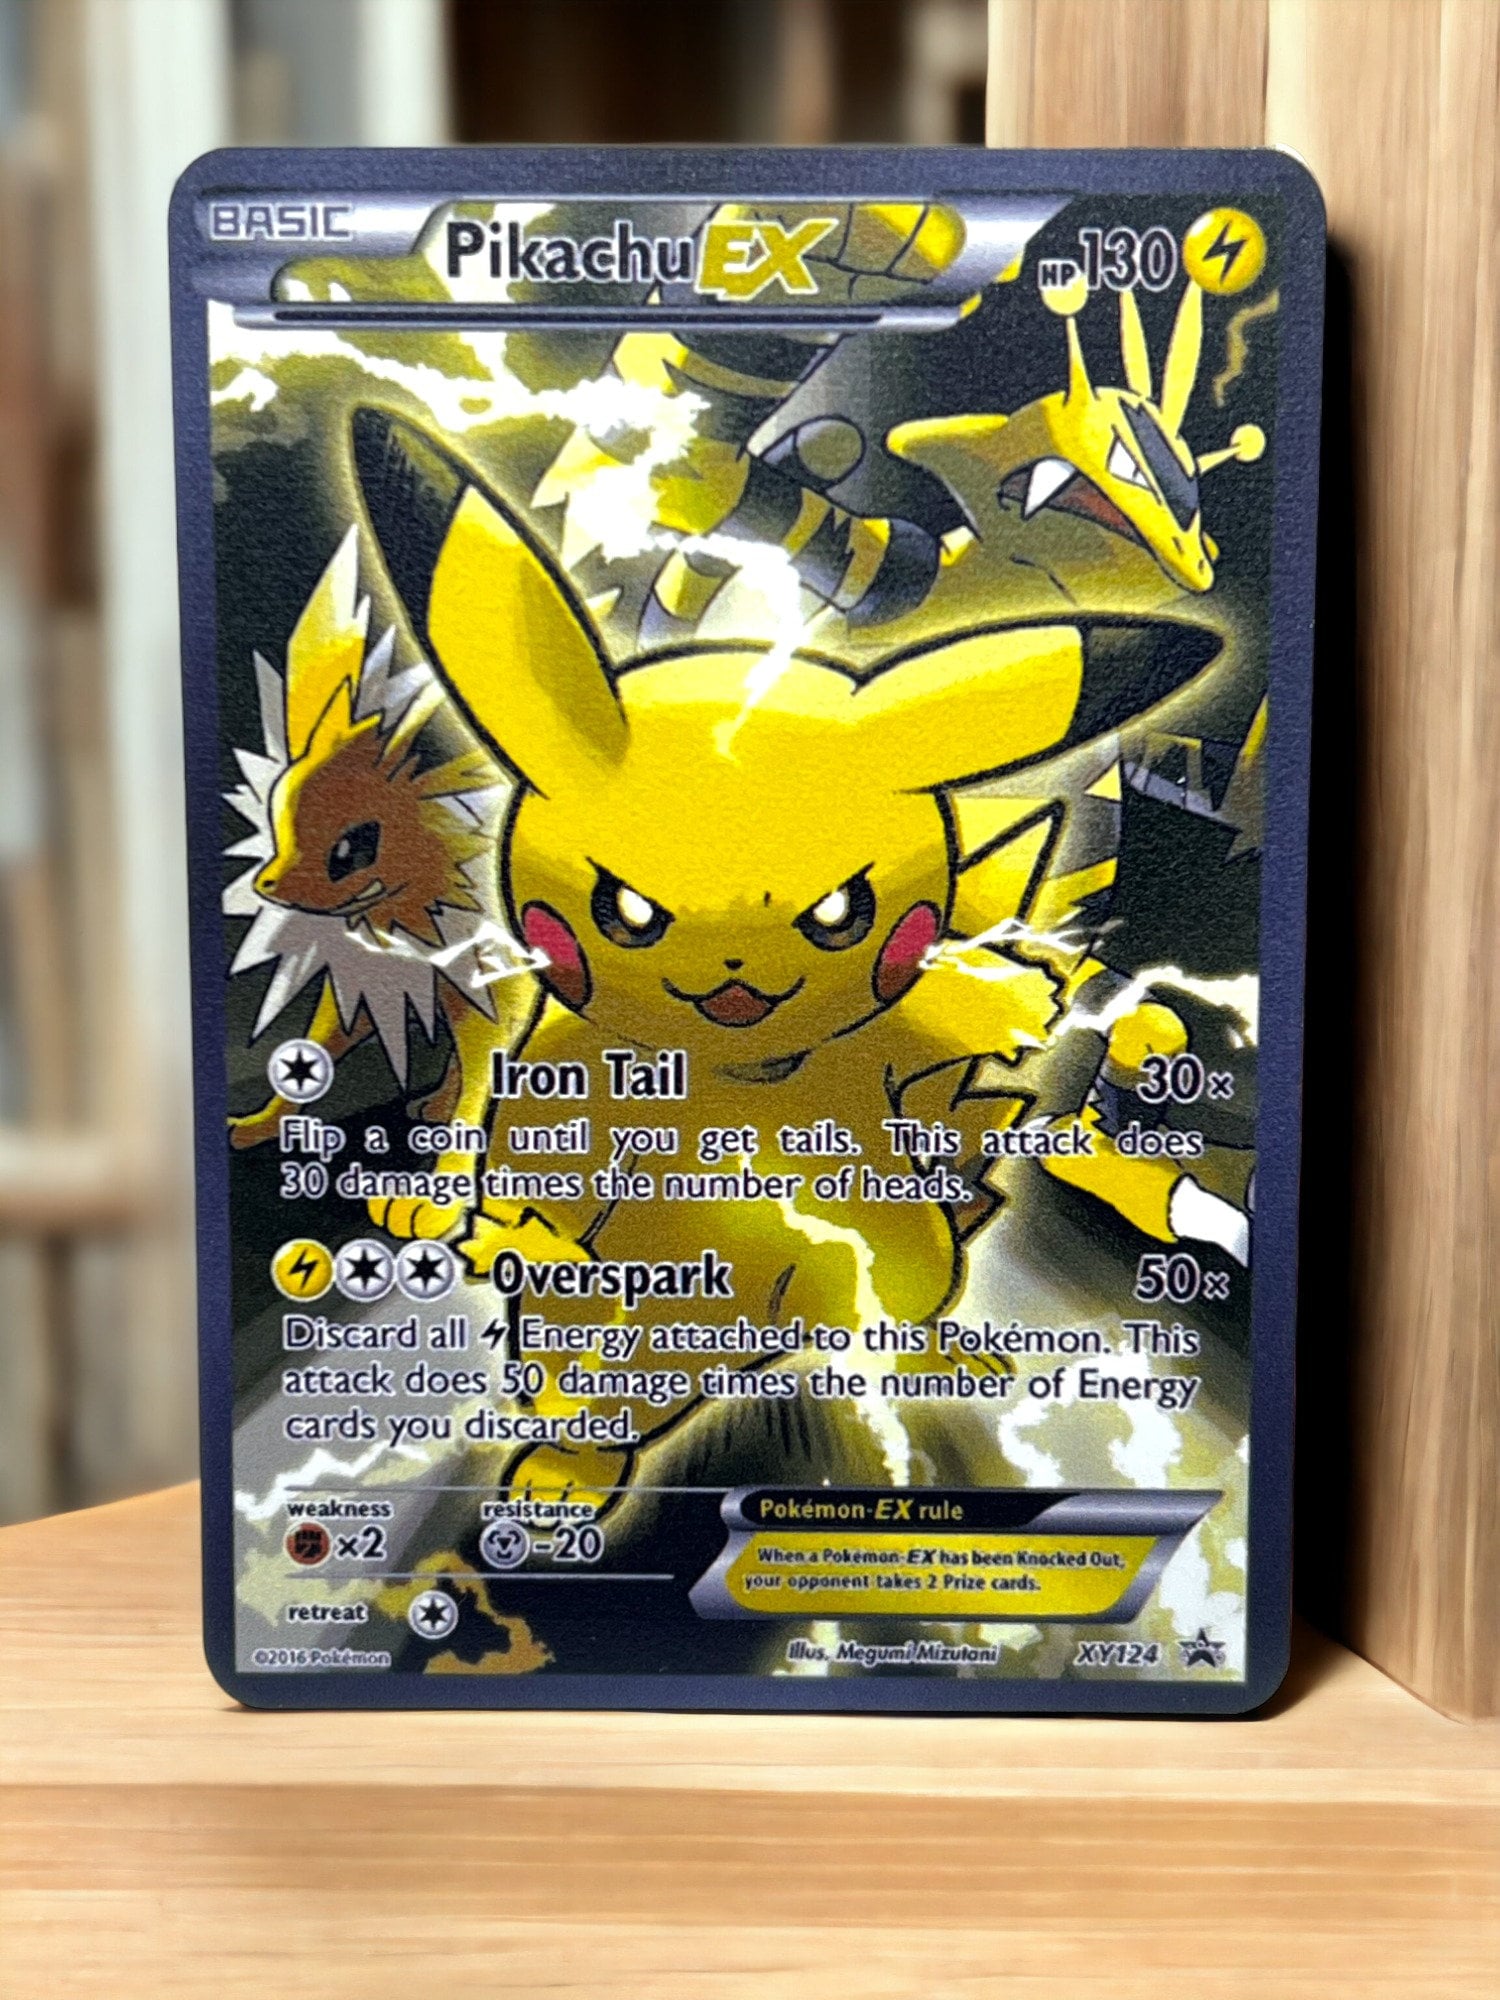 The latest Pokemon CardsVmax GX Gold Pocket Monster Card Spanish Iron Metal  Gift Game Collection Card